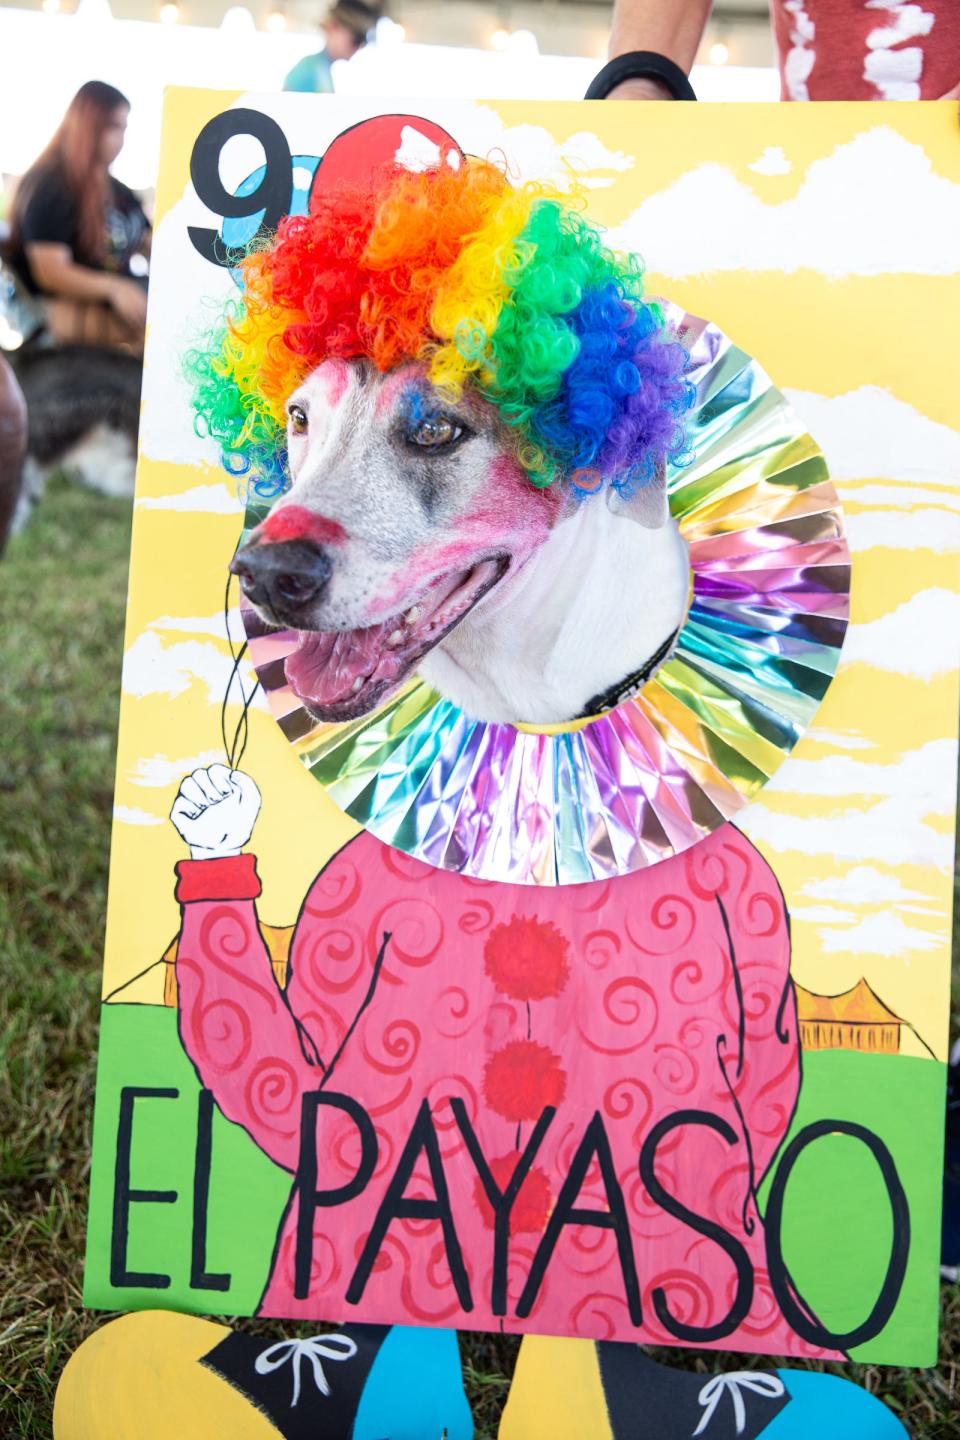 Amy competes in the 11th annual Thomas J. Henry Bark in the Park costume contest as a Lorteria card  at Water's Edge Park on Saturday, Oct. 8, 2022, in Corpus Christi, Texas